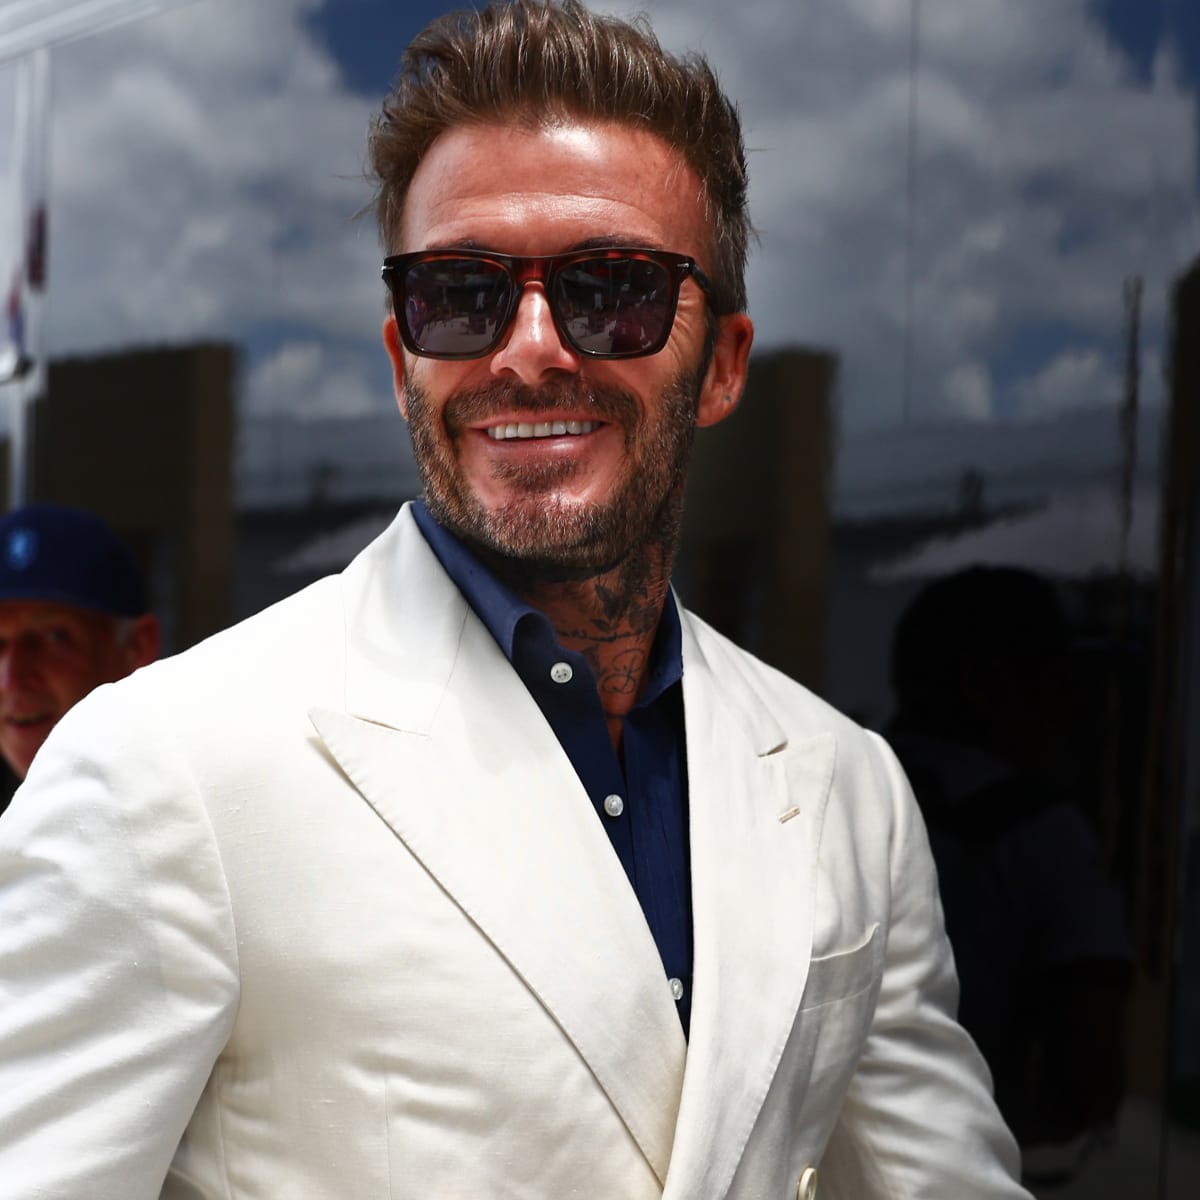 David Beckham wearing a white suit with a sun glass